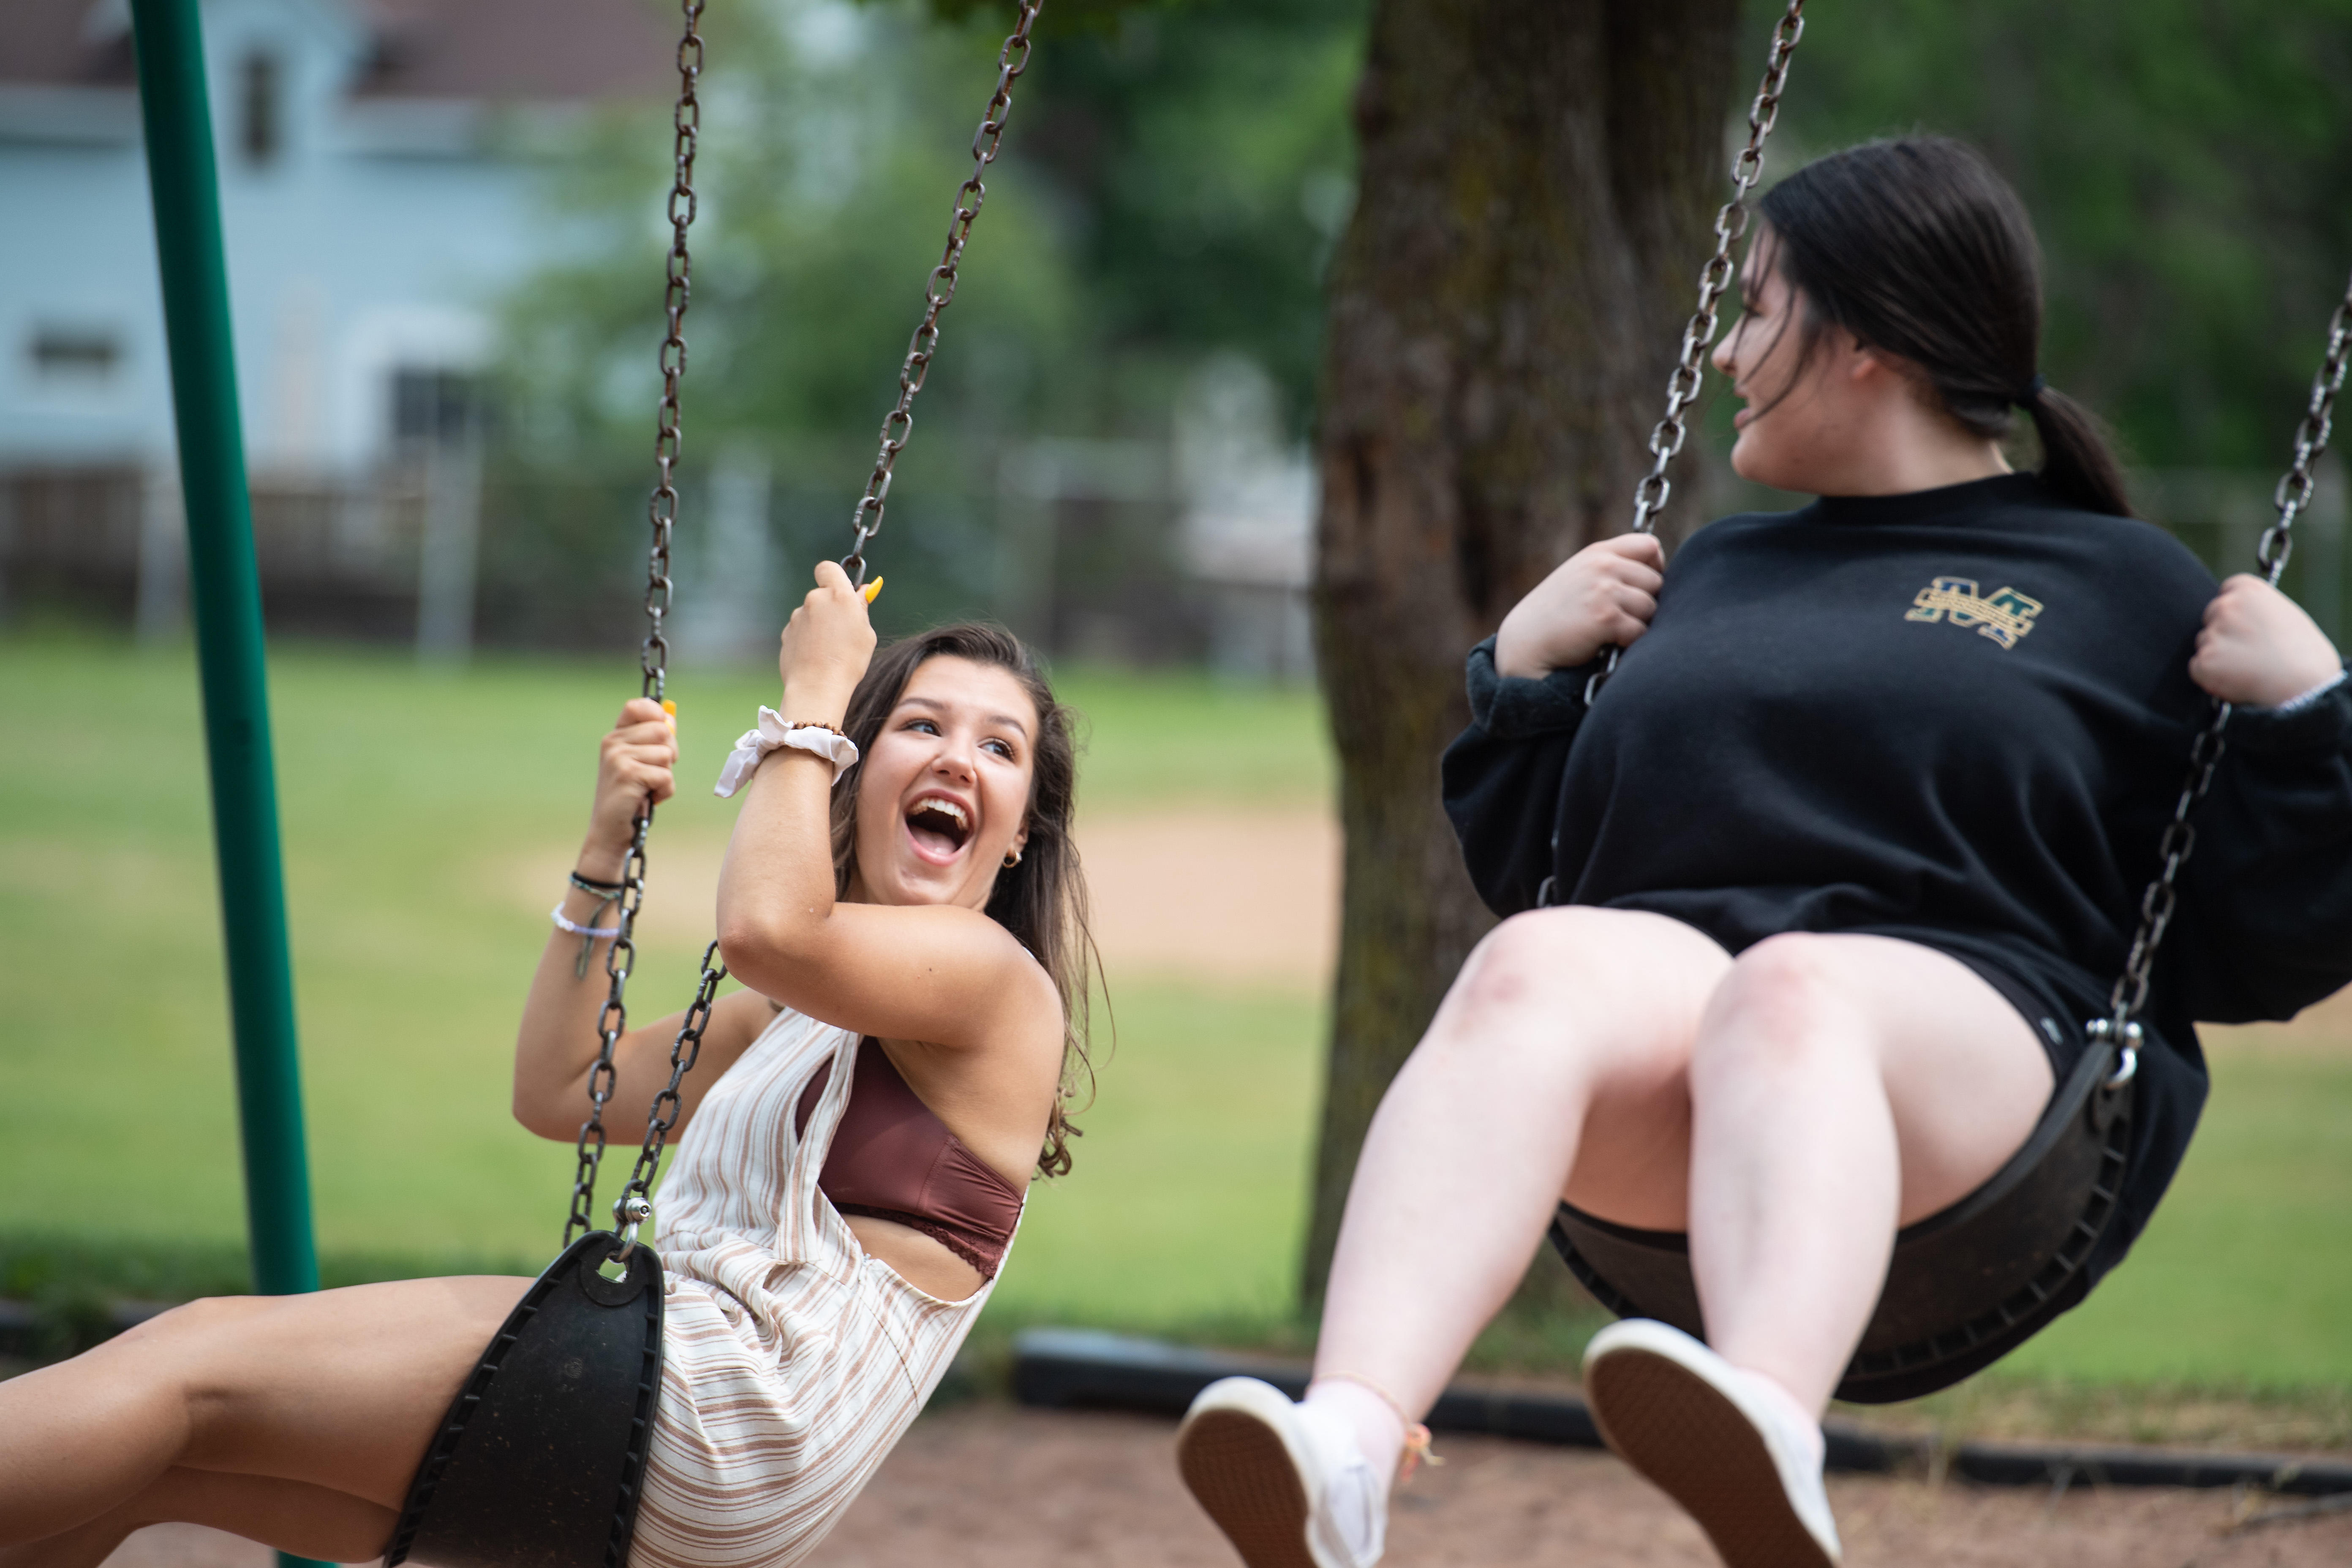 Freshman Lindsay with her sister on a swing